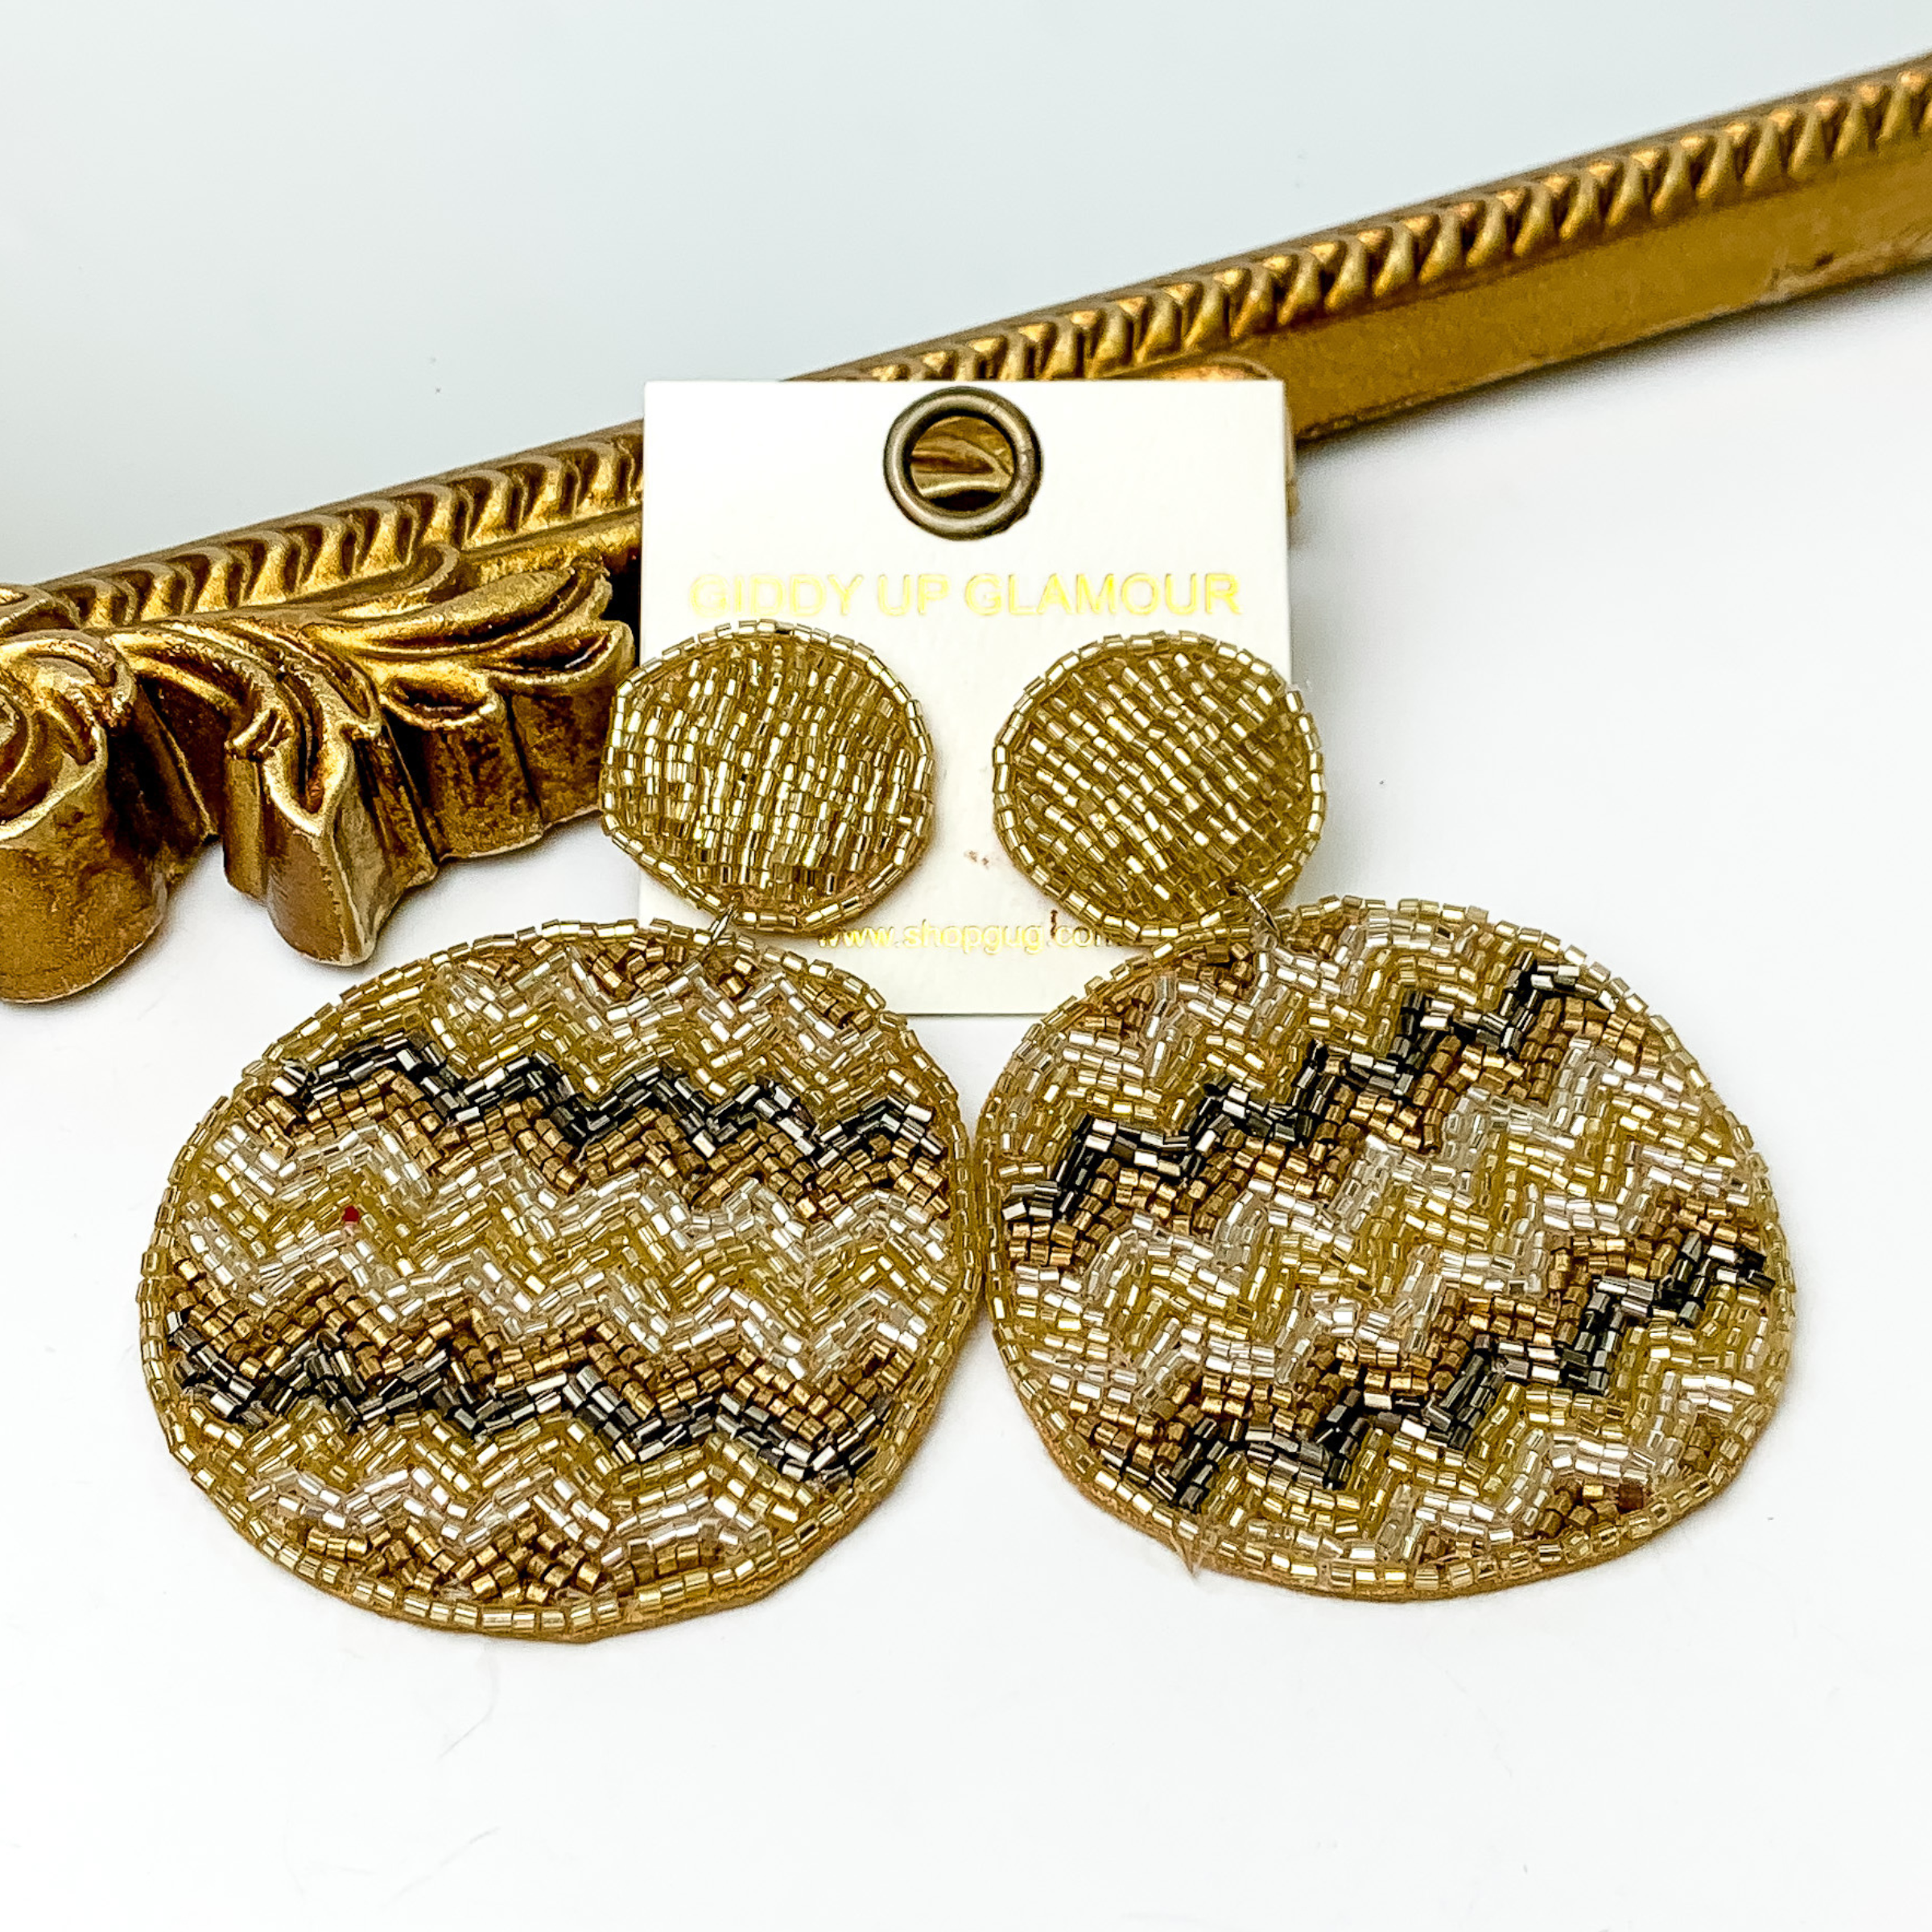 These are circle post back, gold beaded earrings with a beaded circle drop. These earrings include a chevron pattern with gold beads, silver beads, and light gold beads. These earrings are pictured in front of a gold mirror on a white background. 